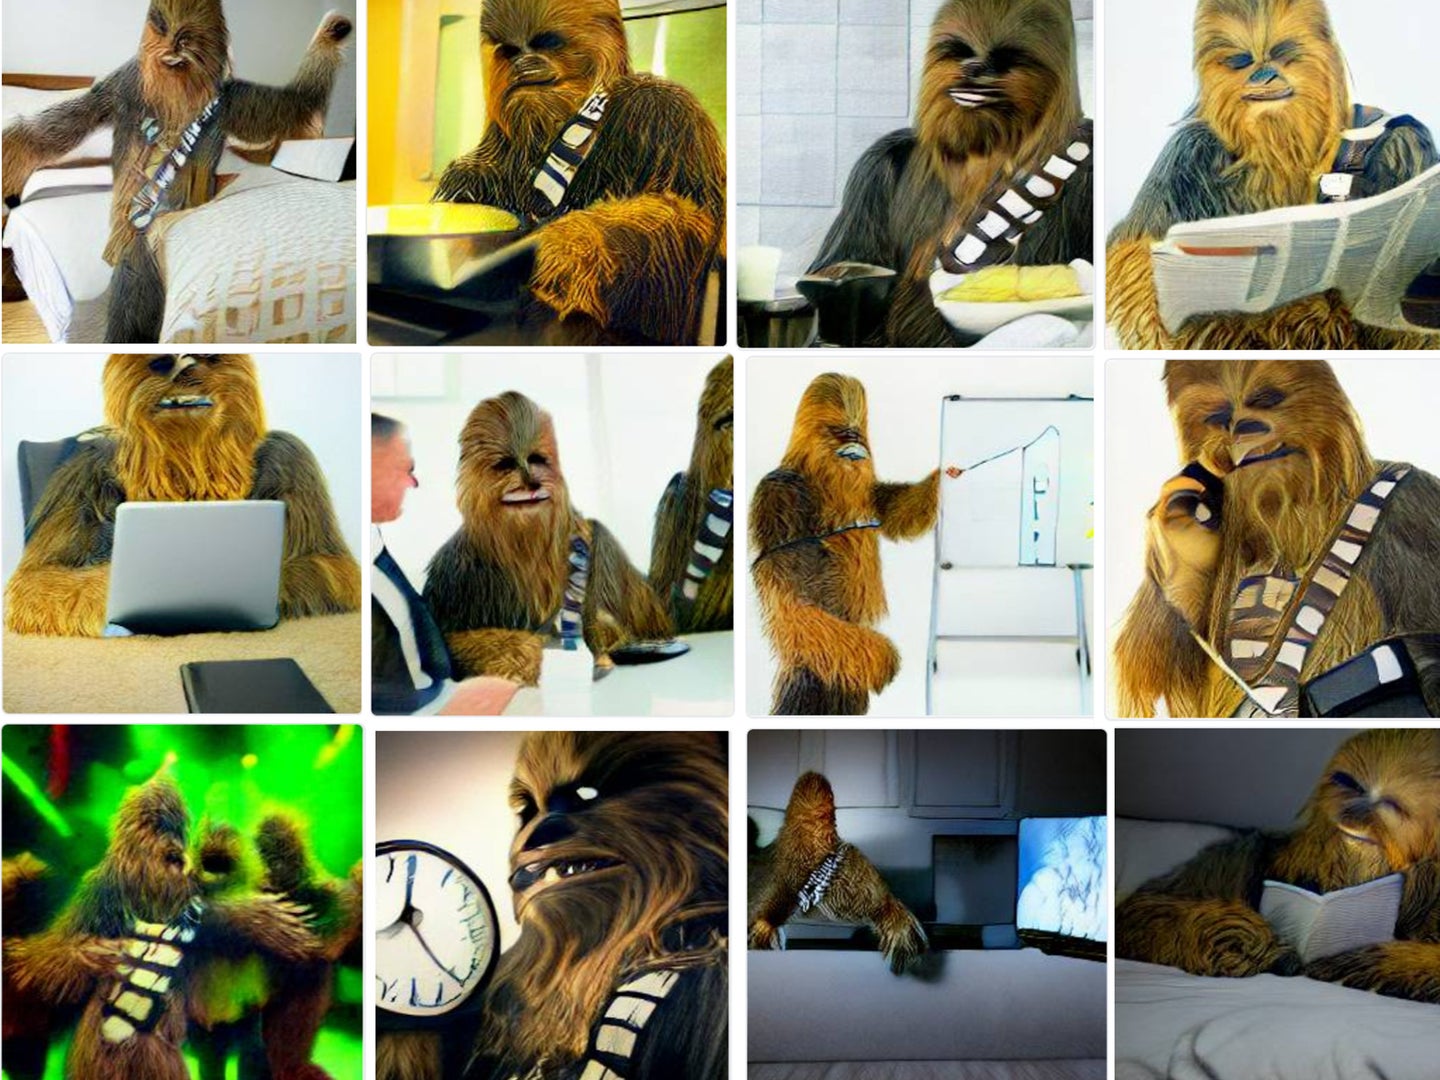 A grid of 12 images depict the Star Wars character Chewbacca performing office job tasks.